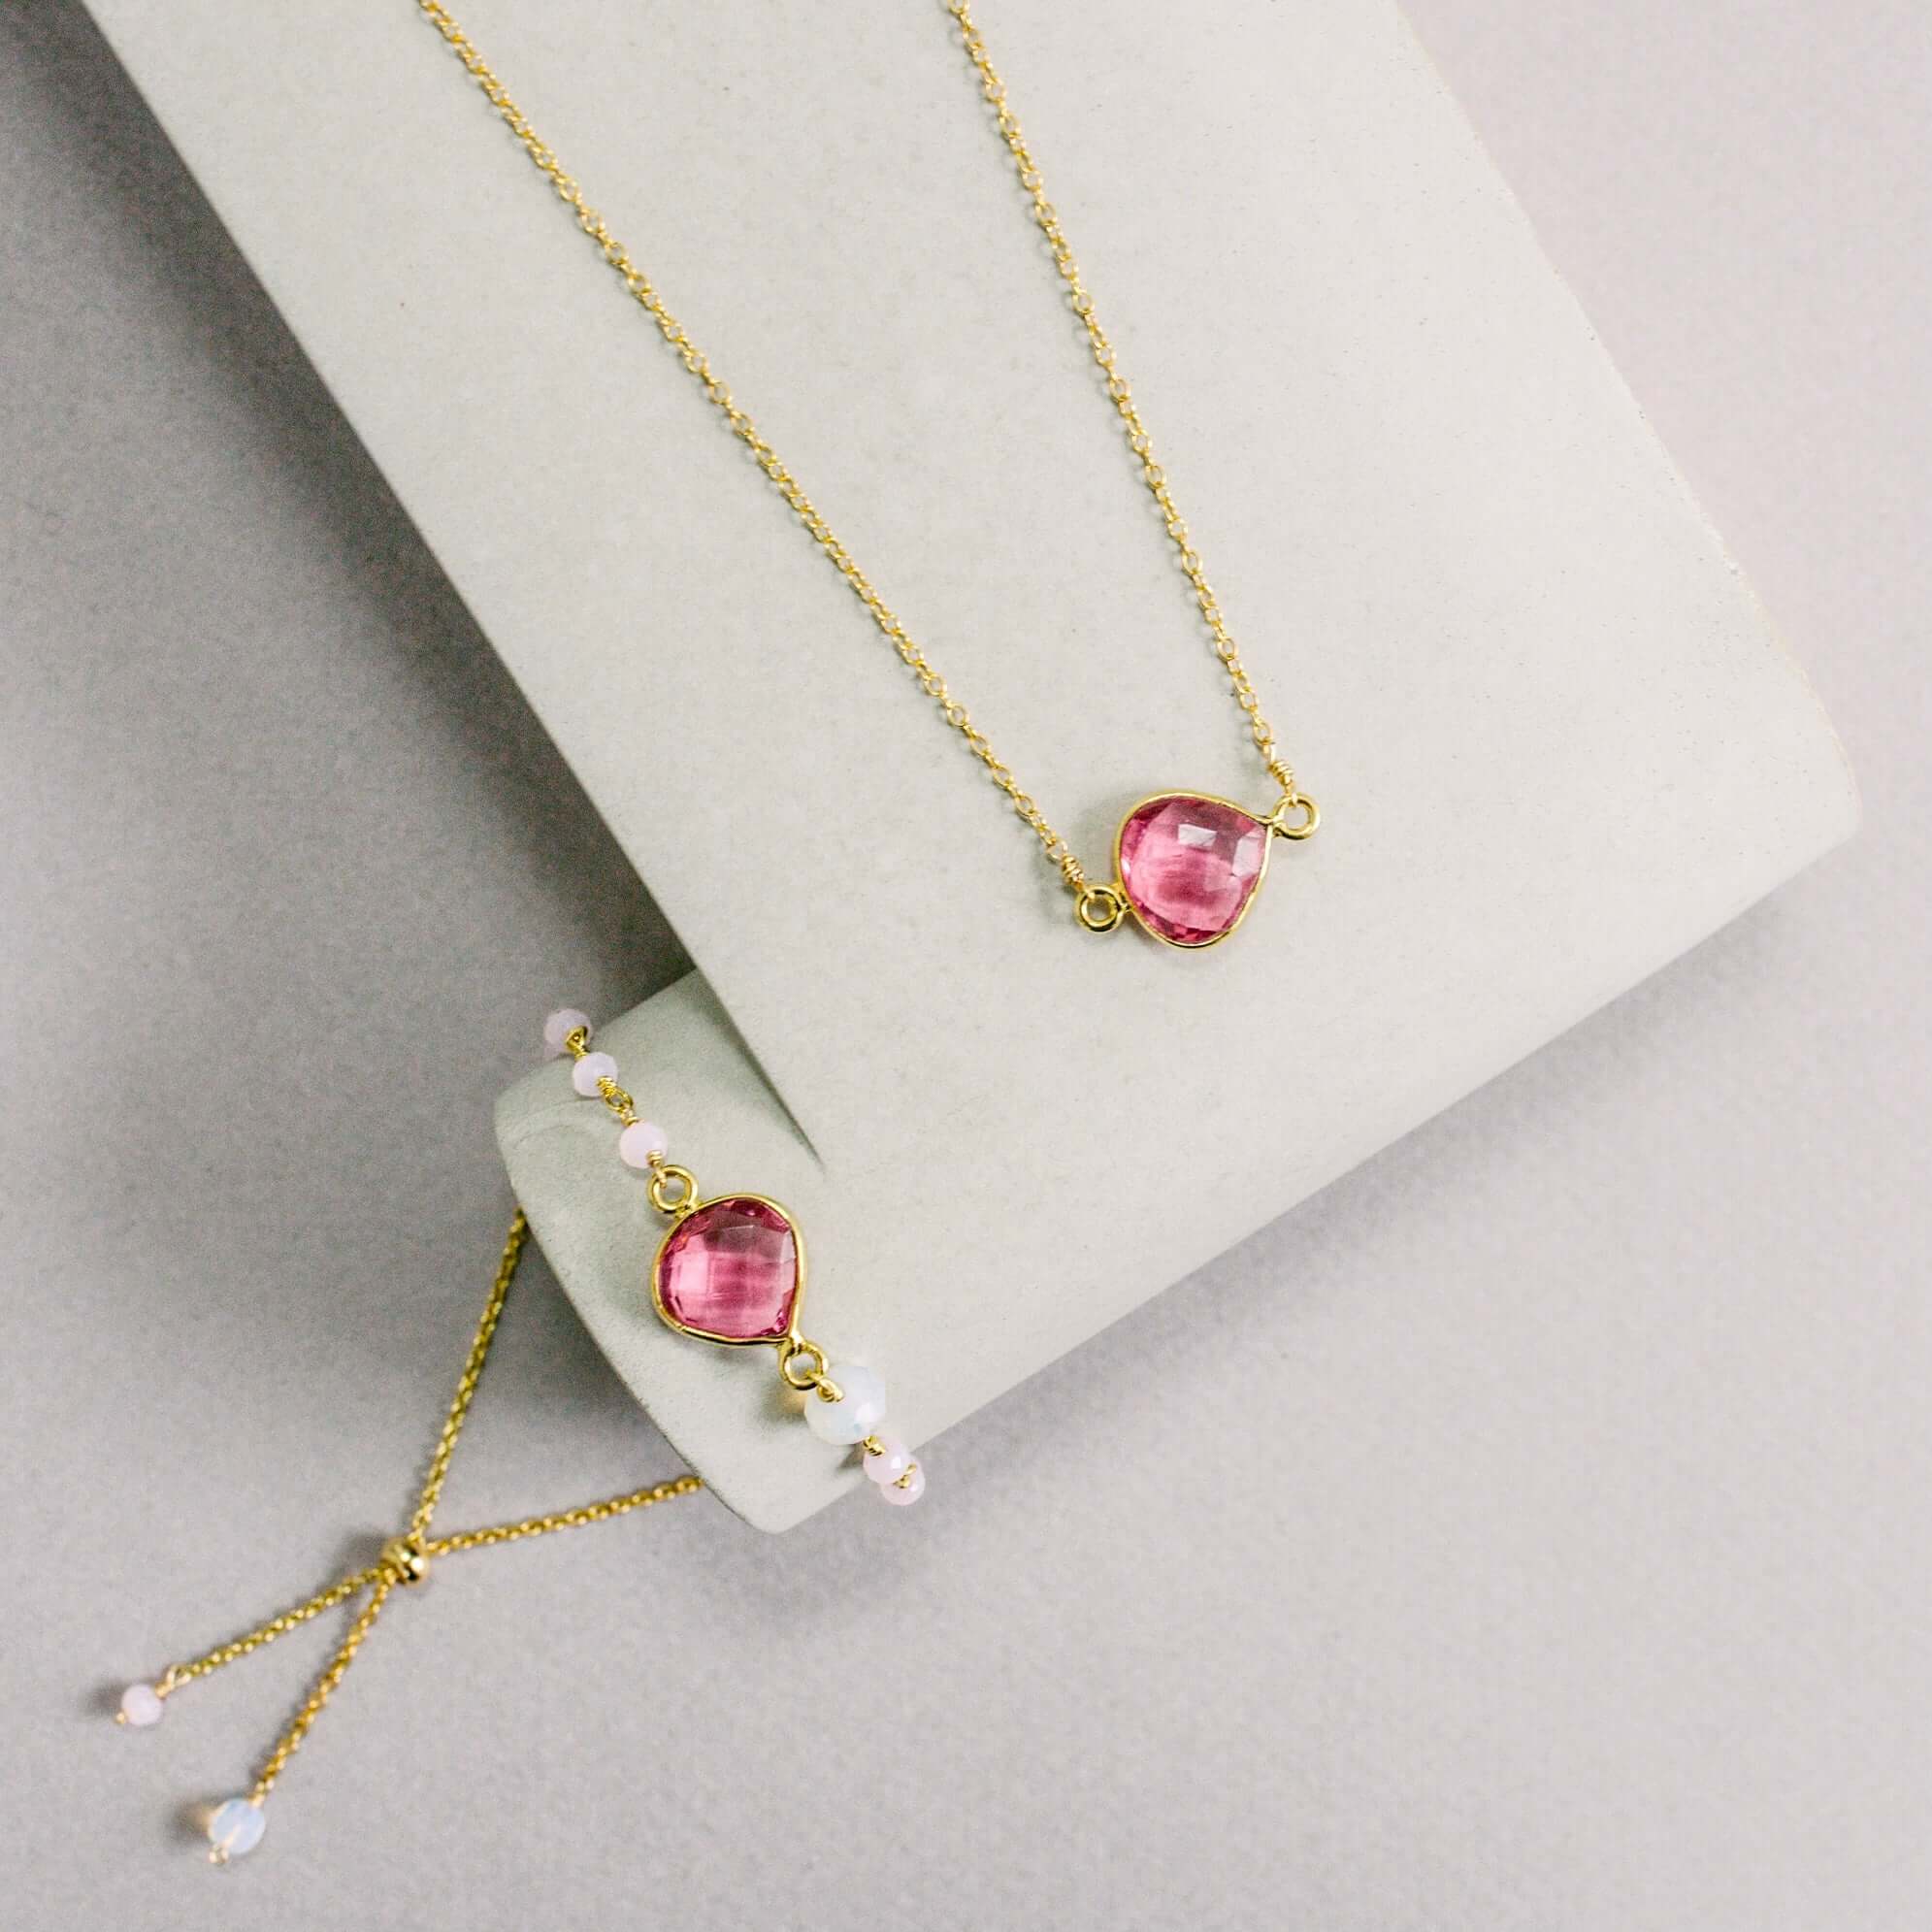 Pink tourmaline and Rose quartz Lariat Necklace in Gold filled